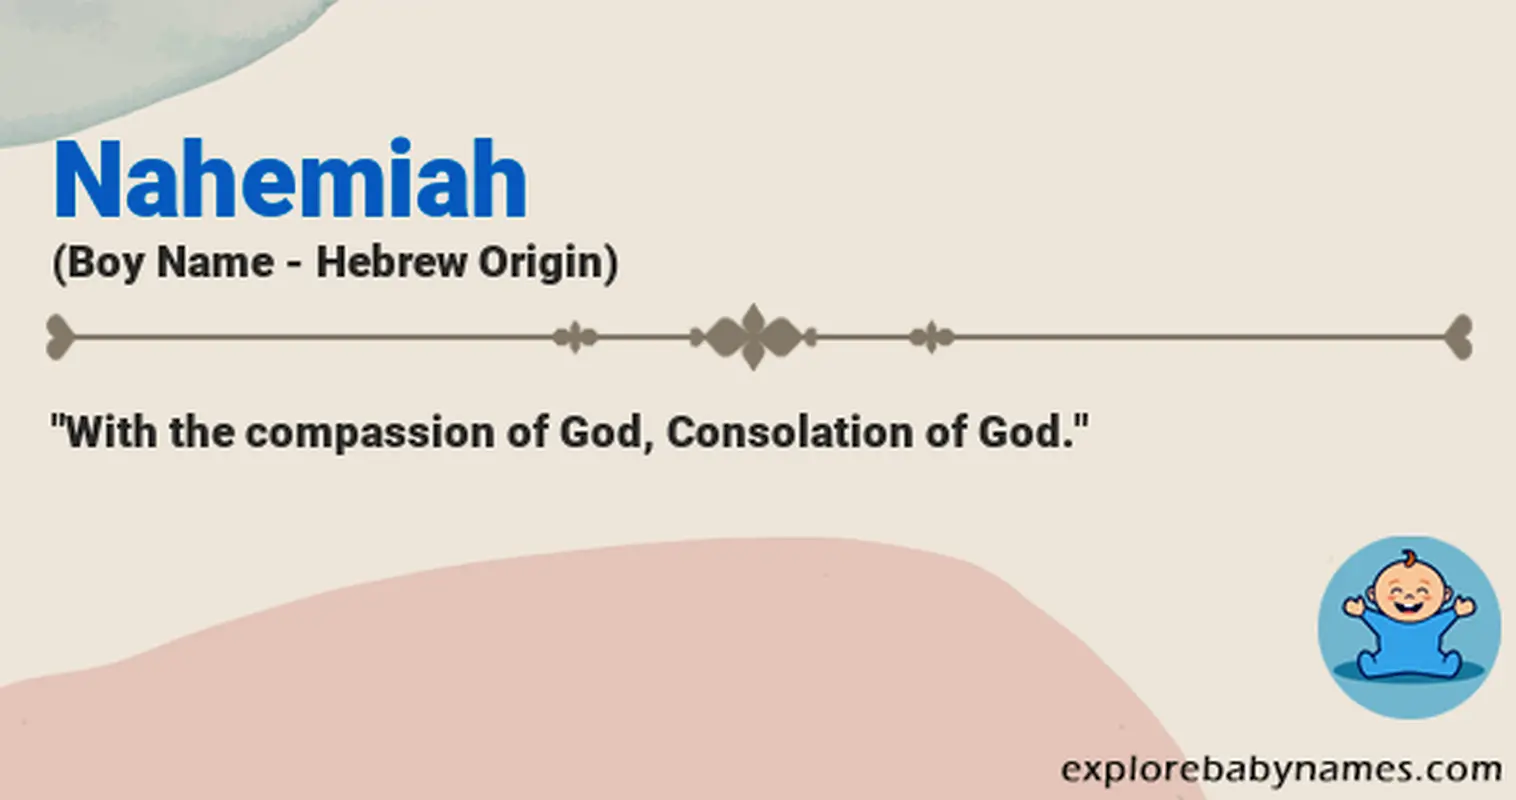 Meaning of Nahemiah